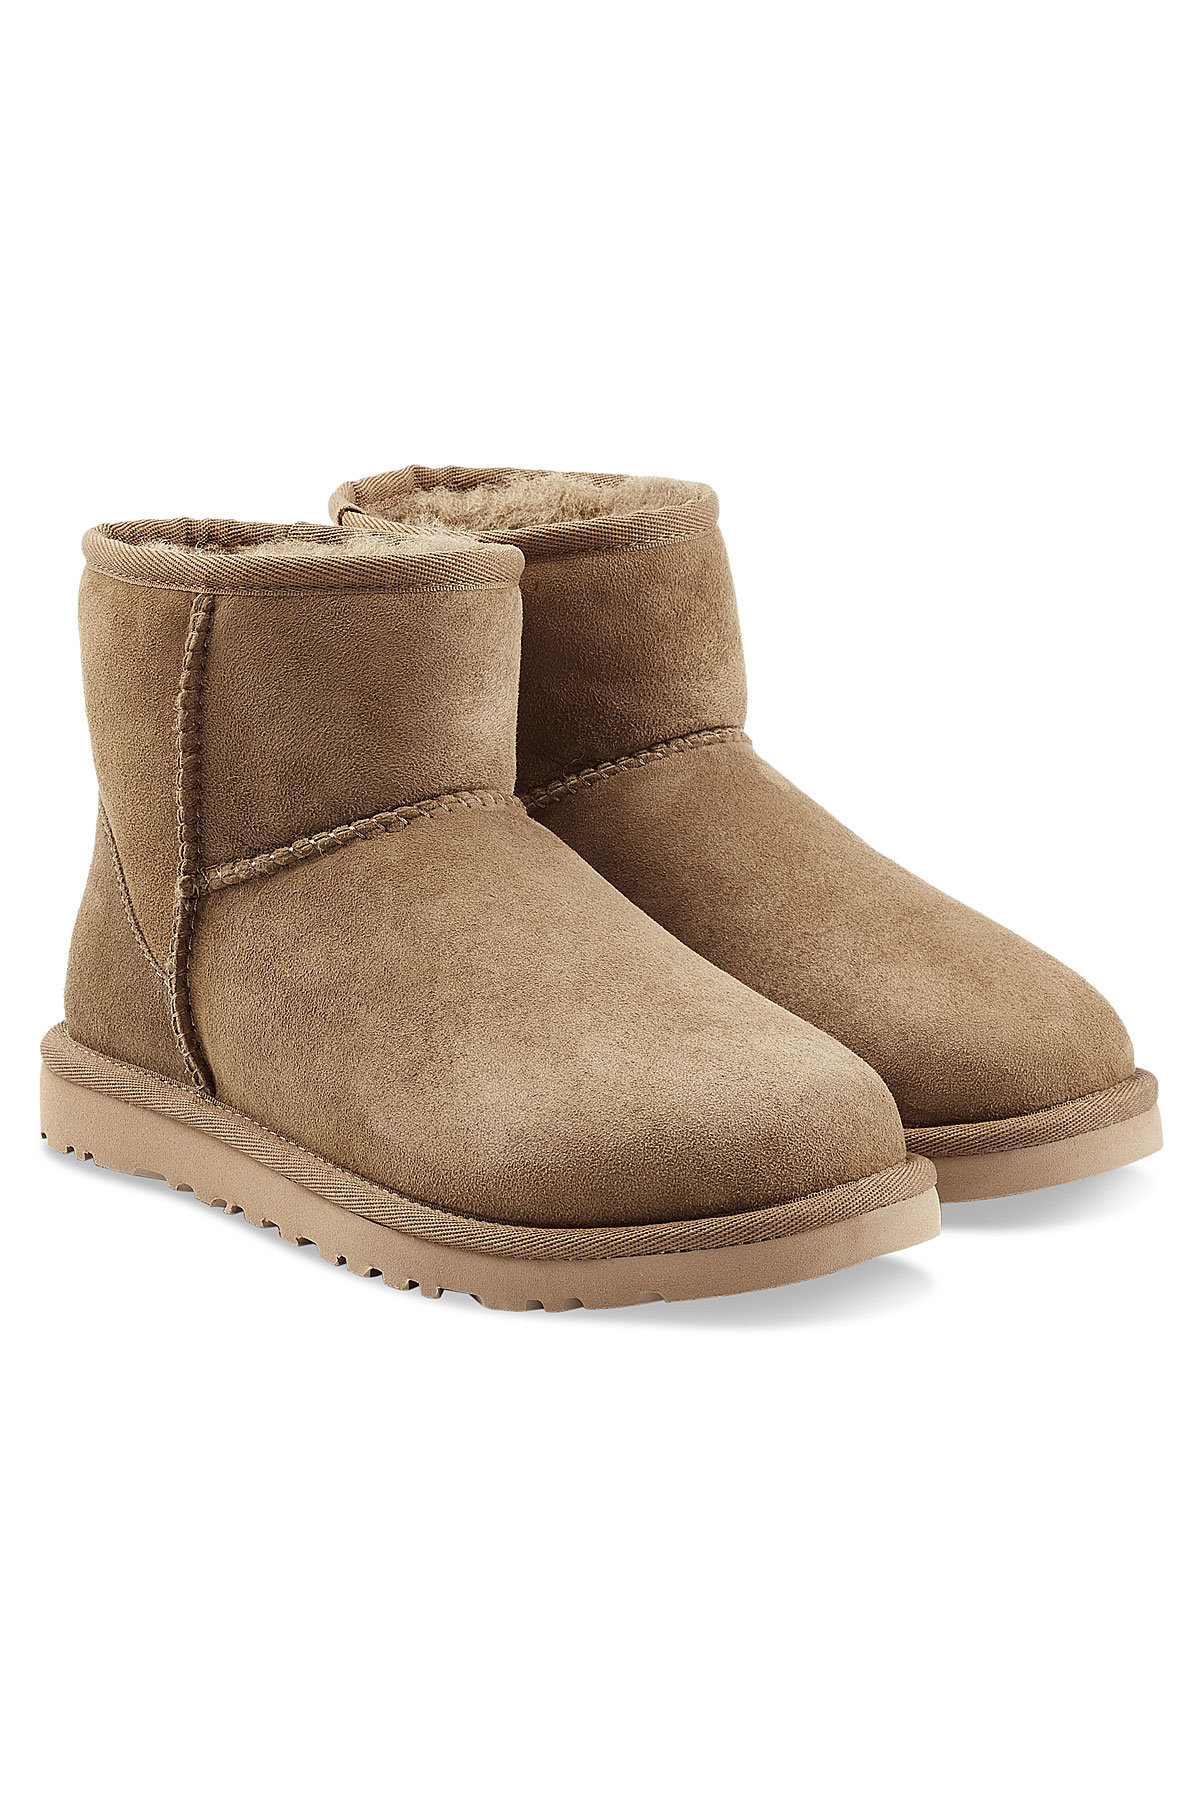 Classic Mini Suede Boots by UGG Australia